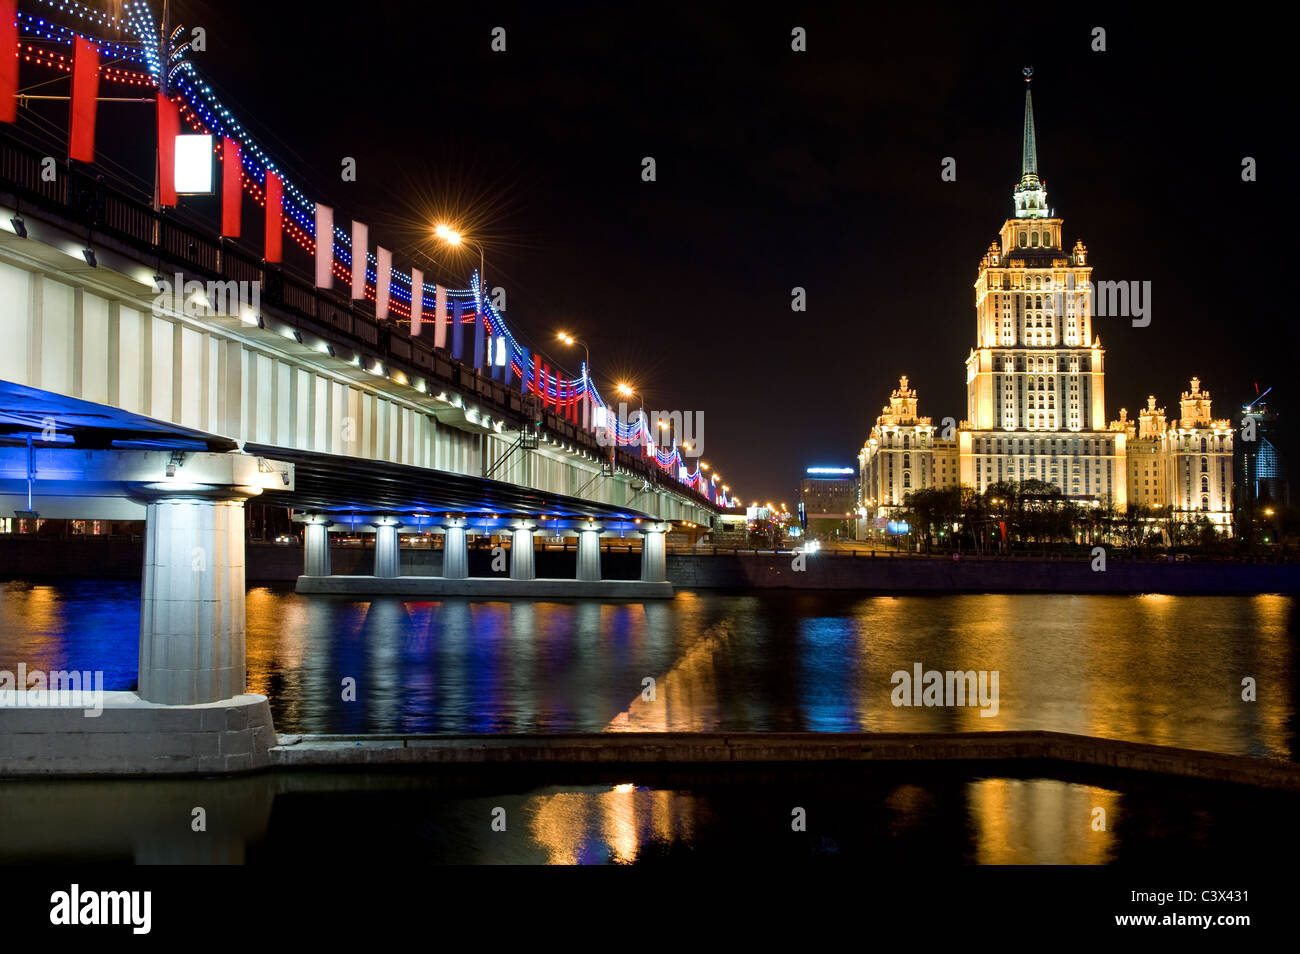 Russia City old skyscraper in Moscow at night Stock Photo